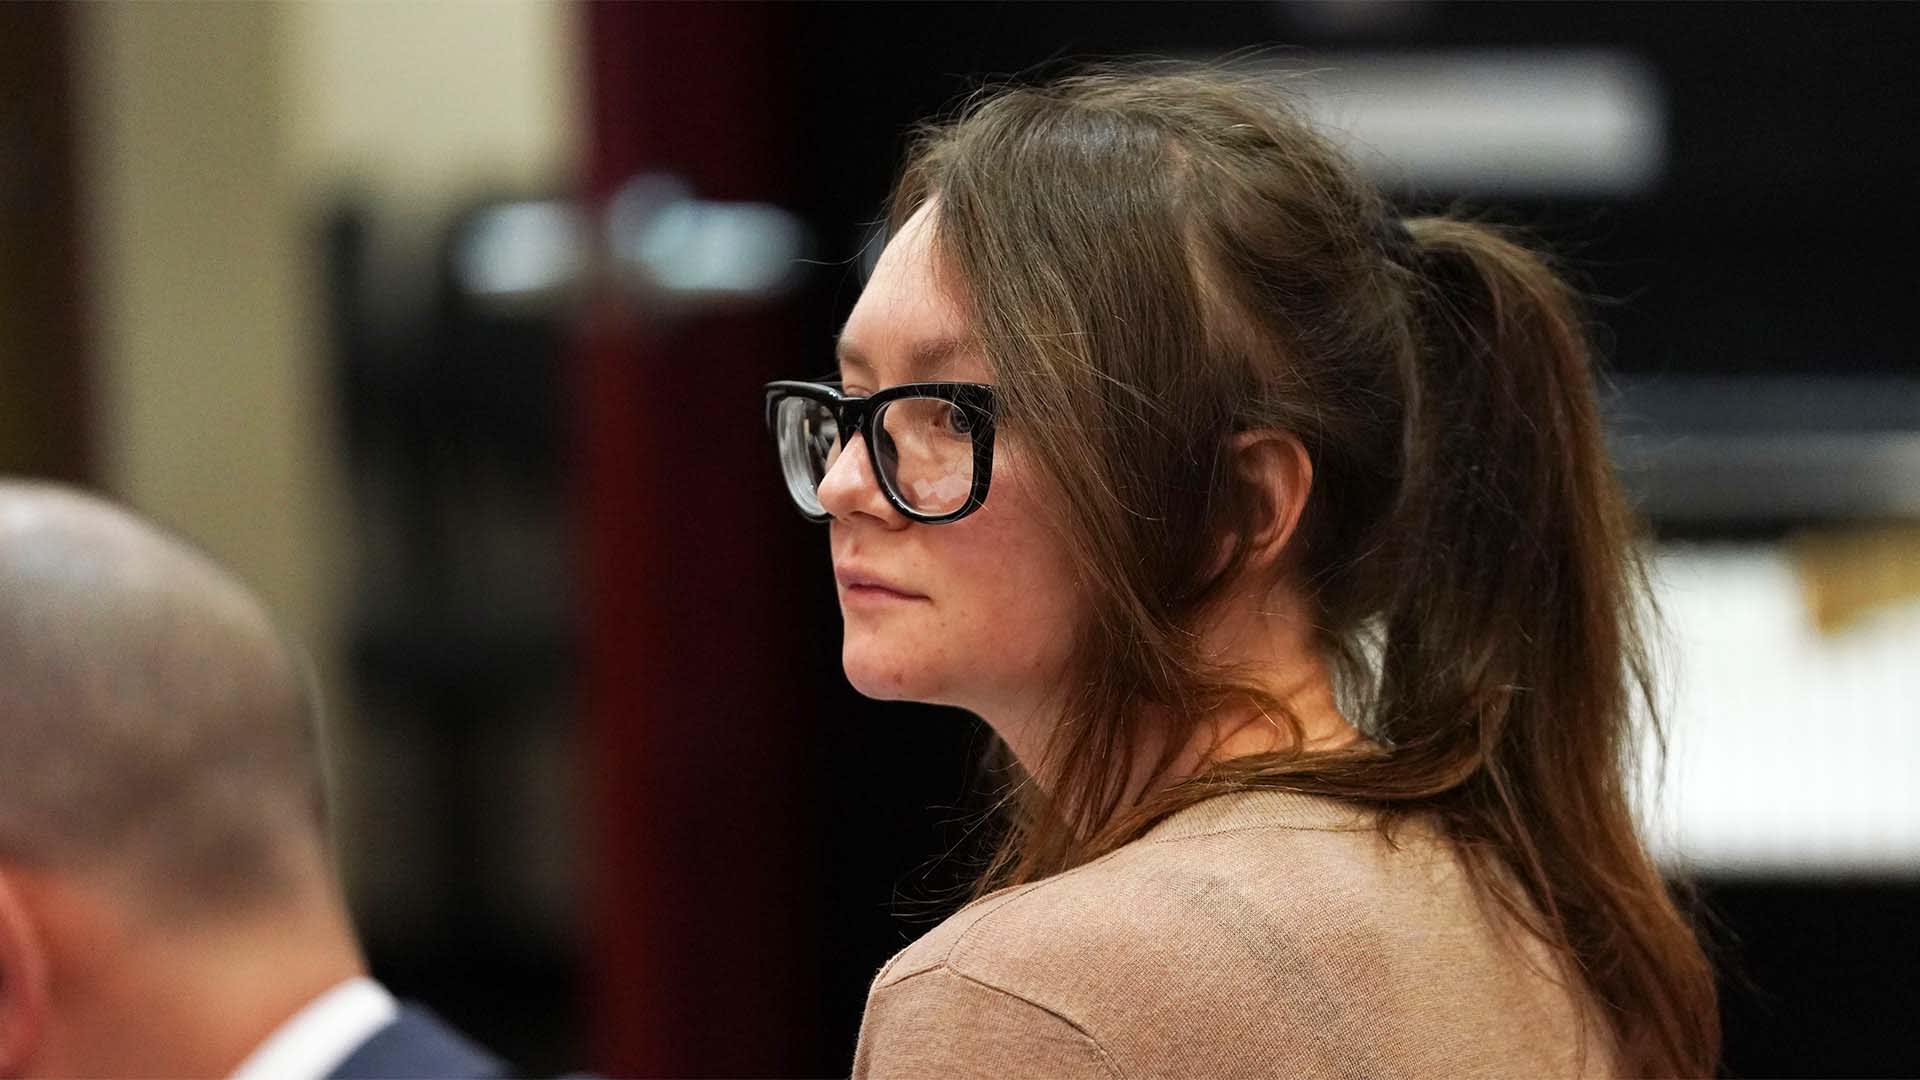 Here's How Smart People Get Deceived by Liars Like Fake German Heiress Anna Delvey